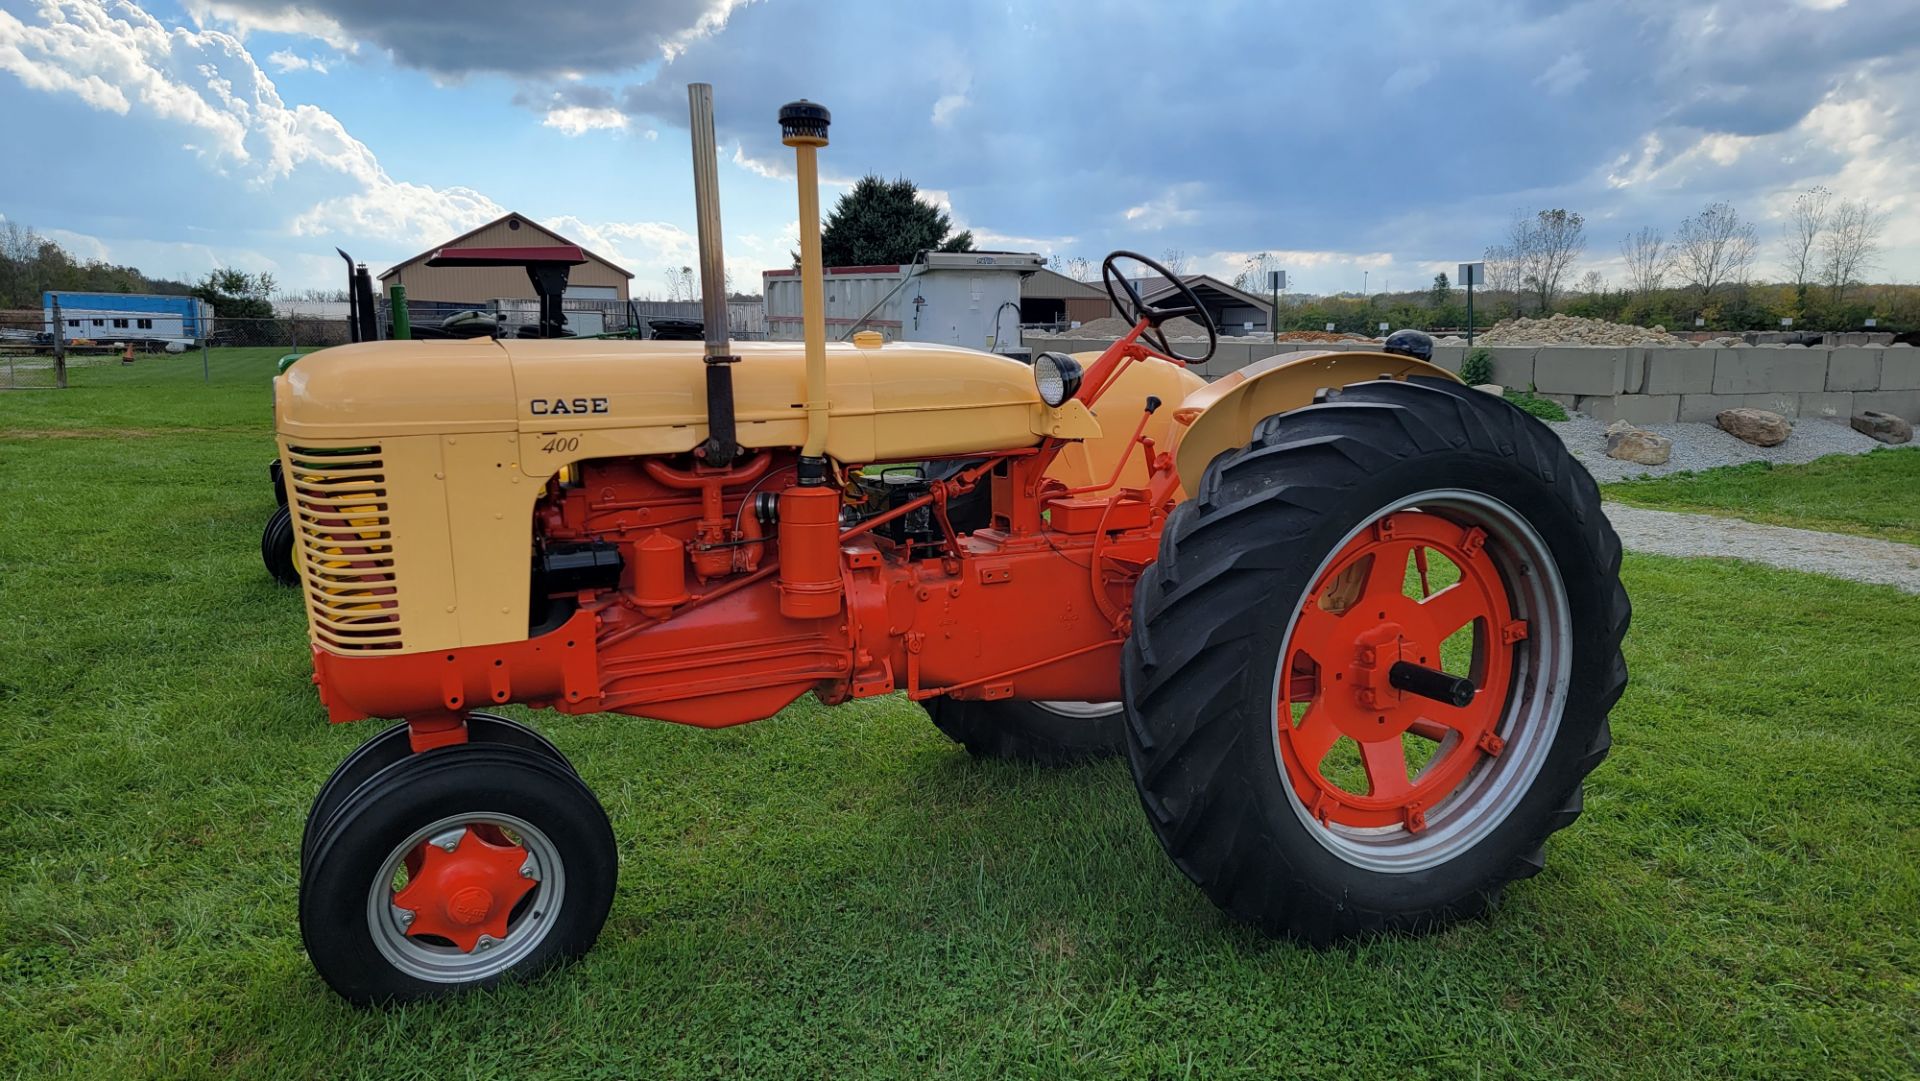 1956 Case 400 Row Crop Tractor, Model 411, s/n 8081224, Gasoline Engine, New in 1956, Restored - Image 17 of 32